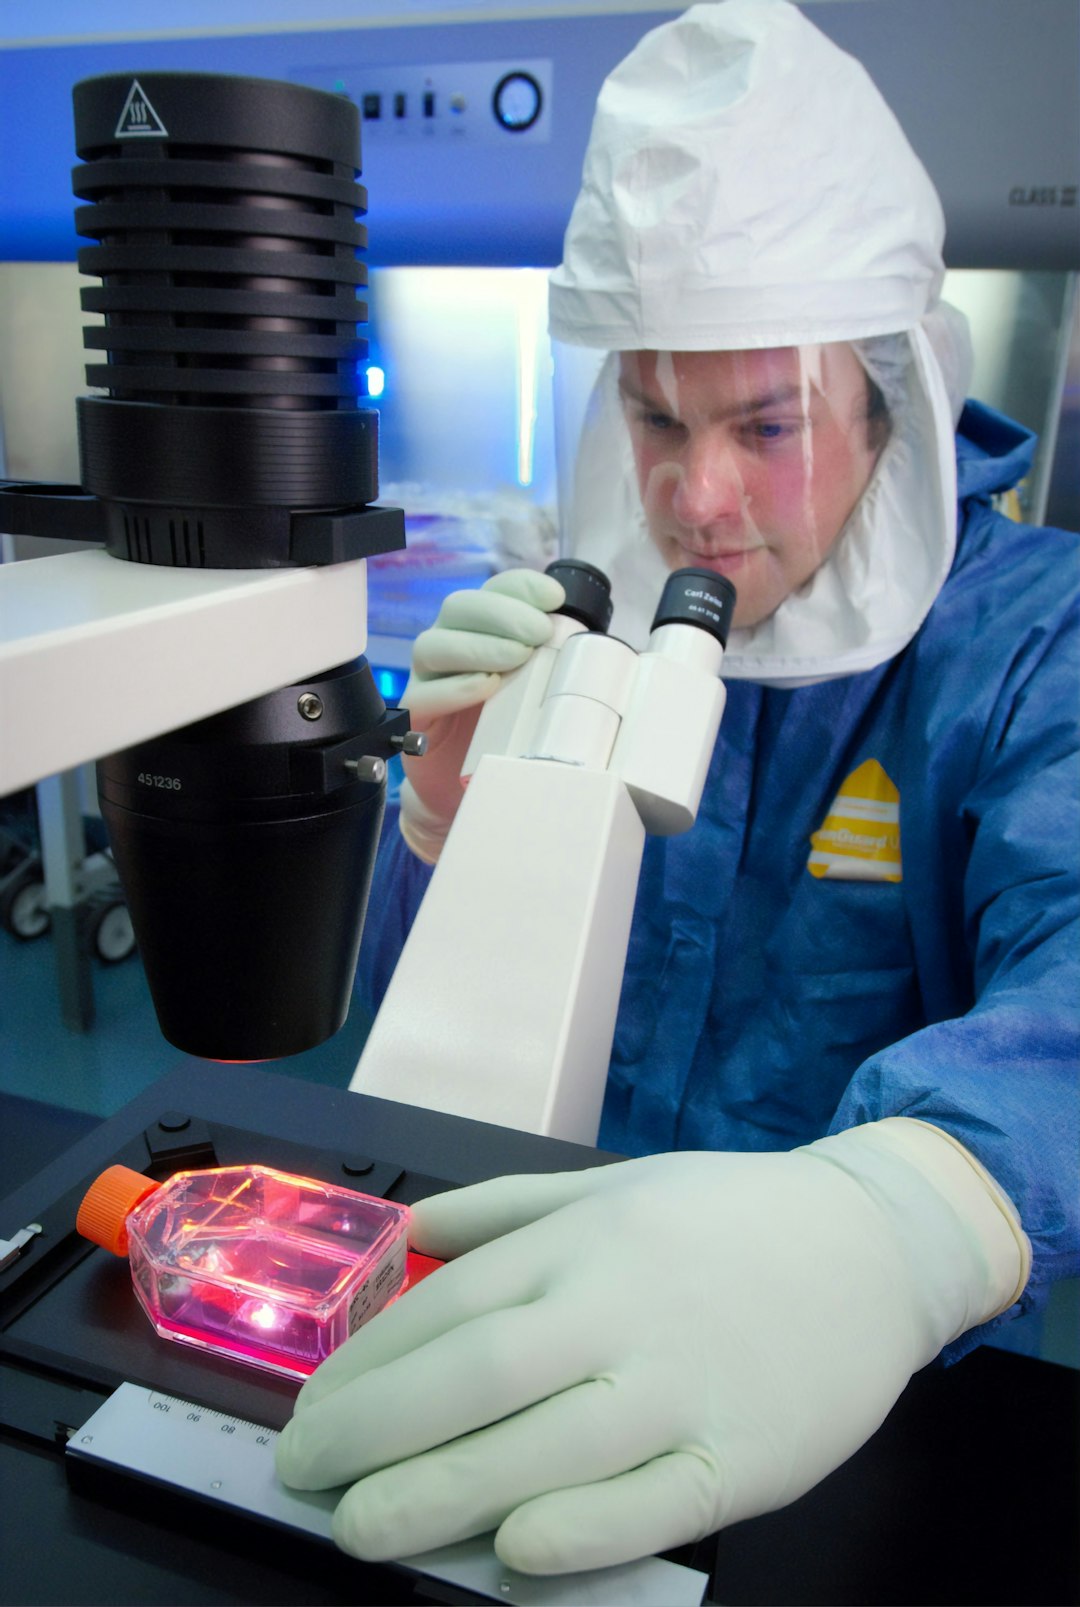 This 2008 photograph depicted a Centers for Disease Control and Prevention (CDC) scientist as he was examining a culture flask containing Madin-Darby Canine Kidney (MDCK) epithelial cells, and looking for any signs of growth in a stock of Influenza virus.